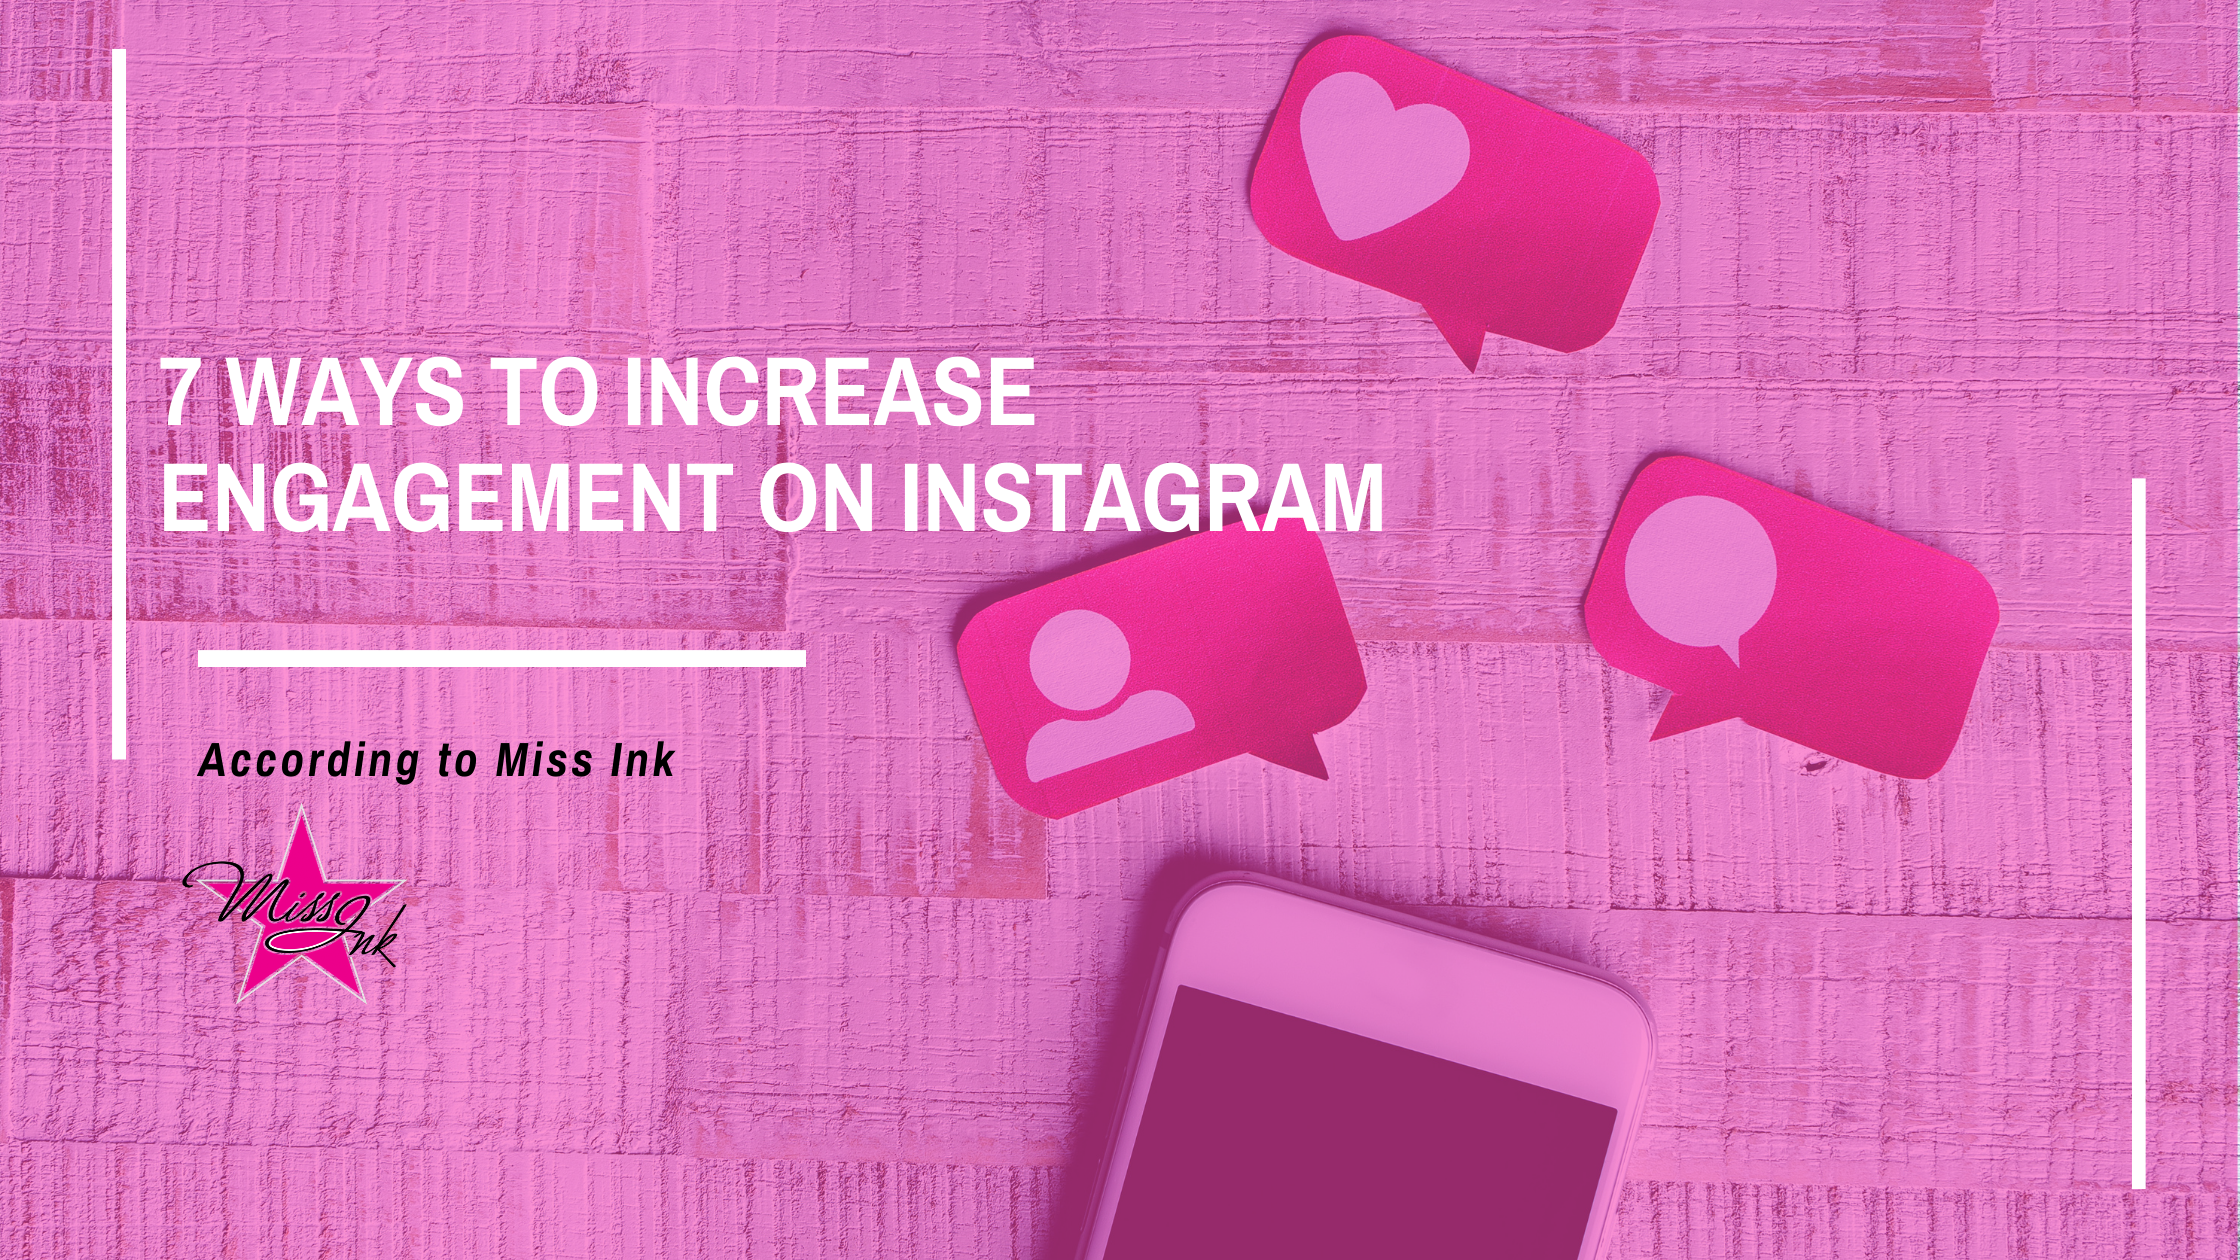 7 Ways to Increase Engagement on Instagram